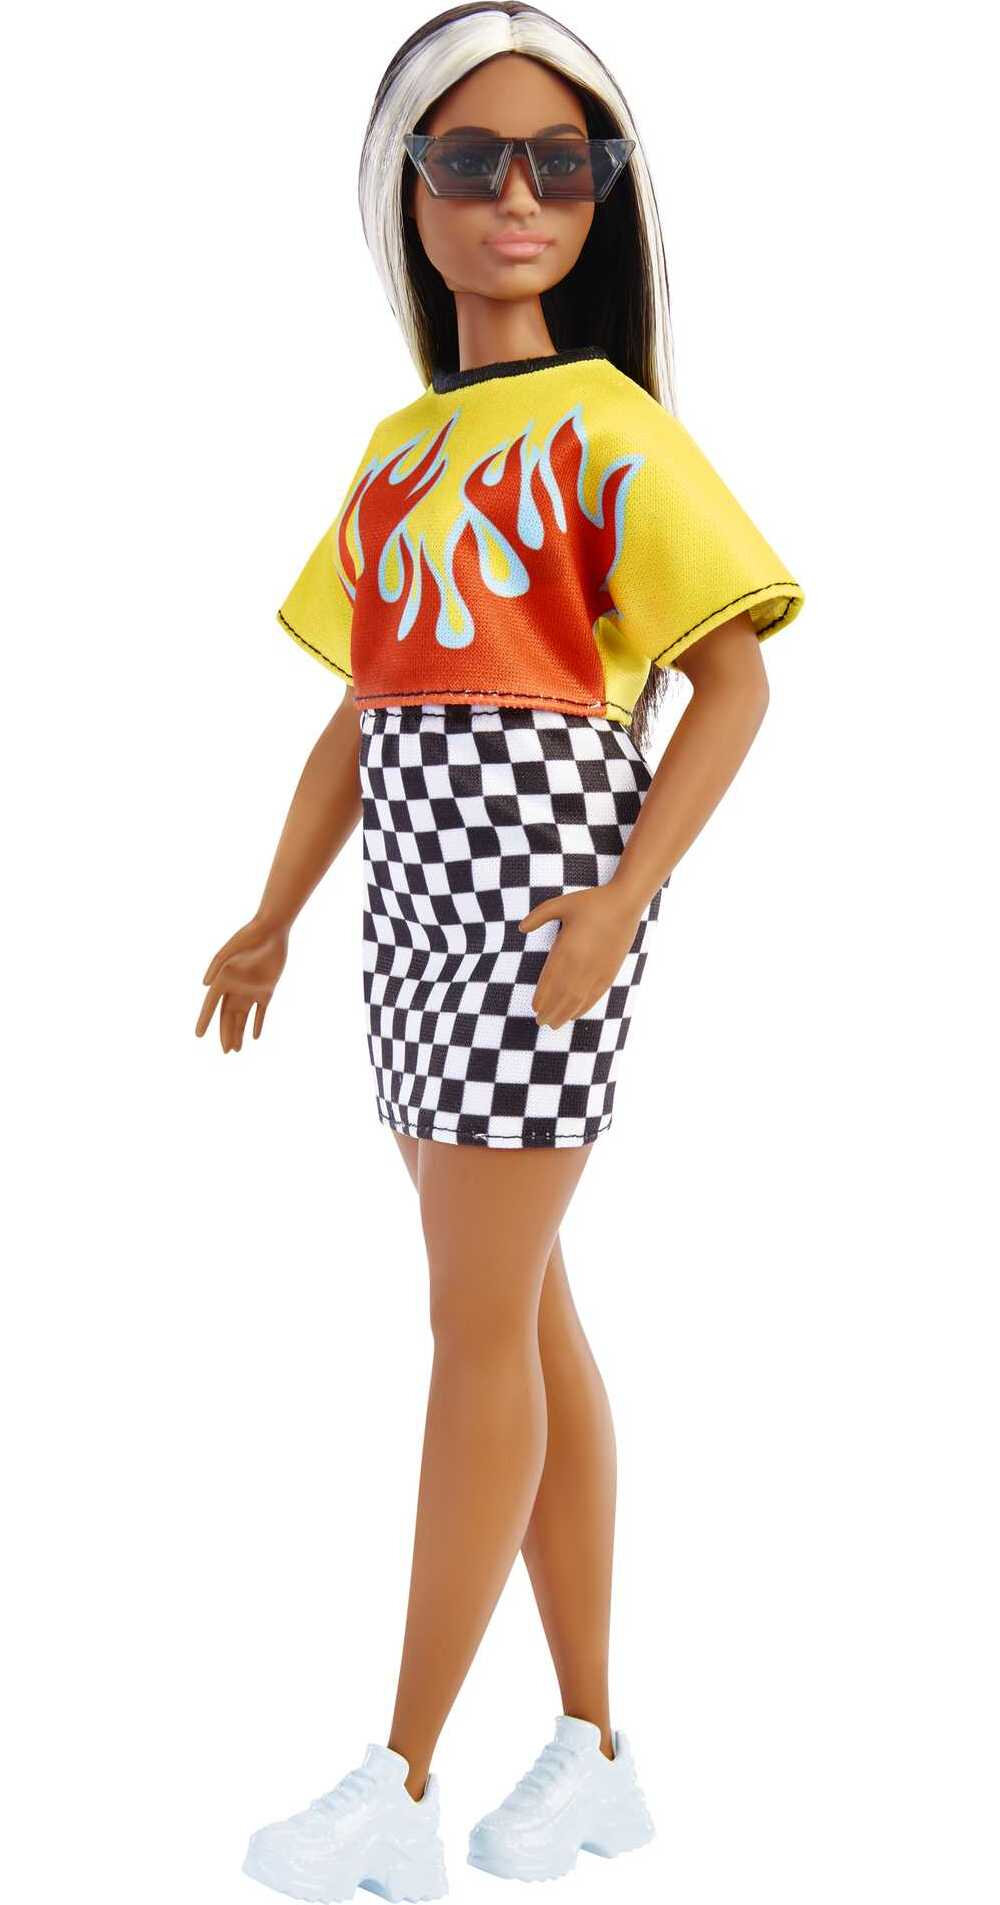 Barbie Fashionistas Doll #179, Curvy with Long Highlighted Hair in Crop ...